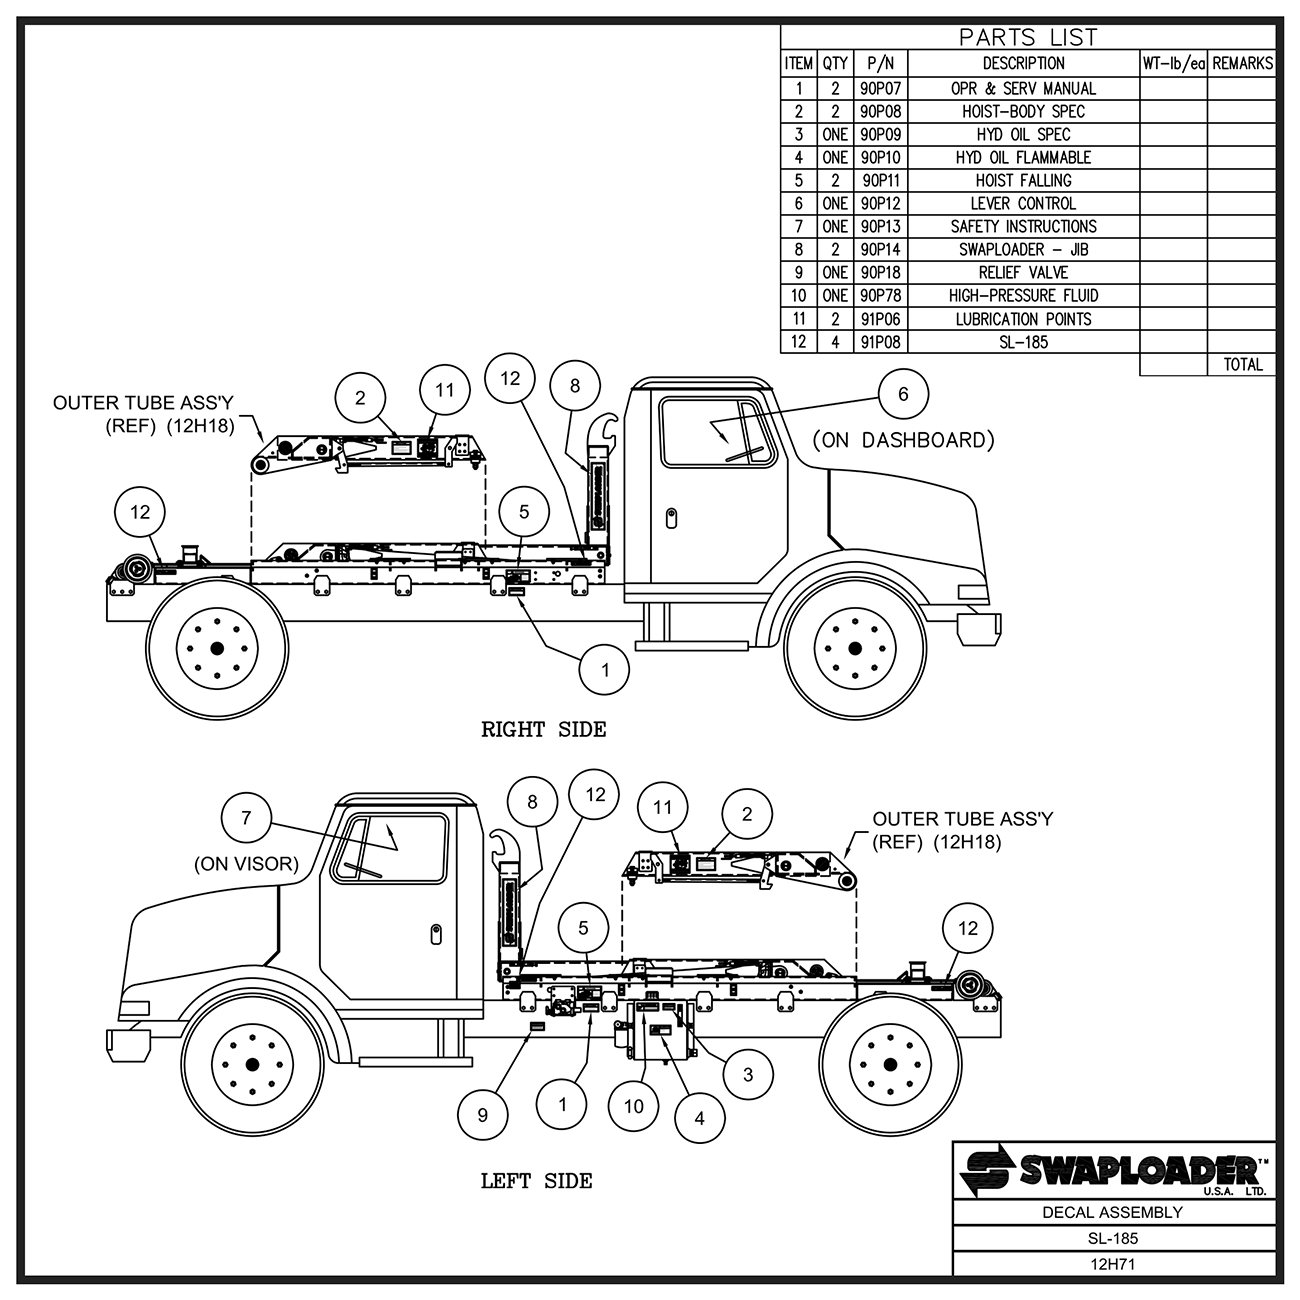 Swaploader SL-185 Decal Assembly Diagram